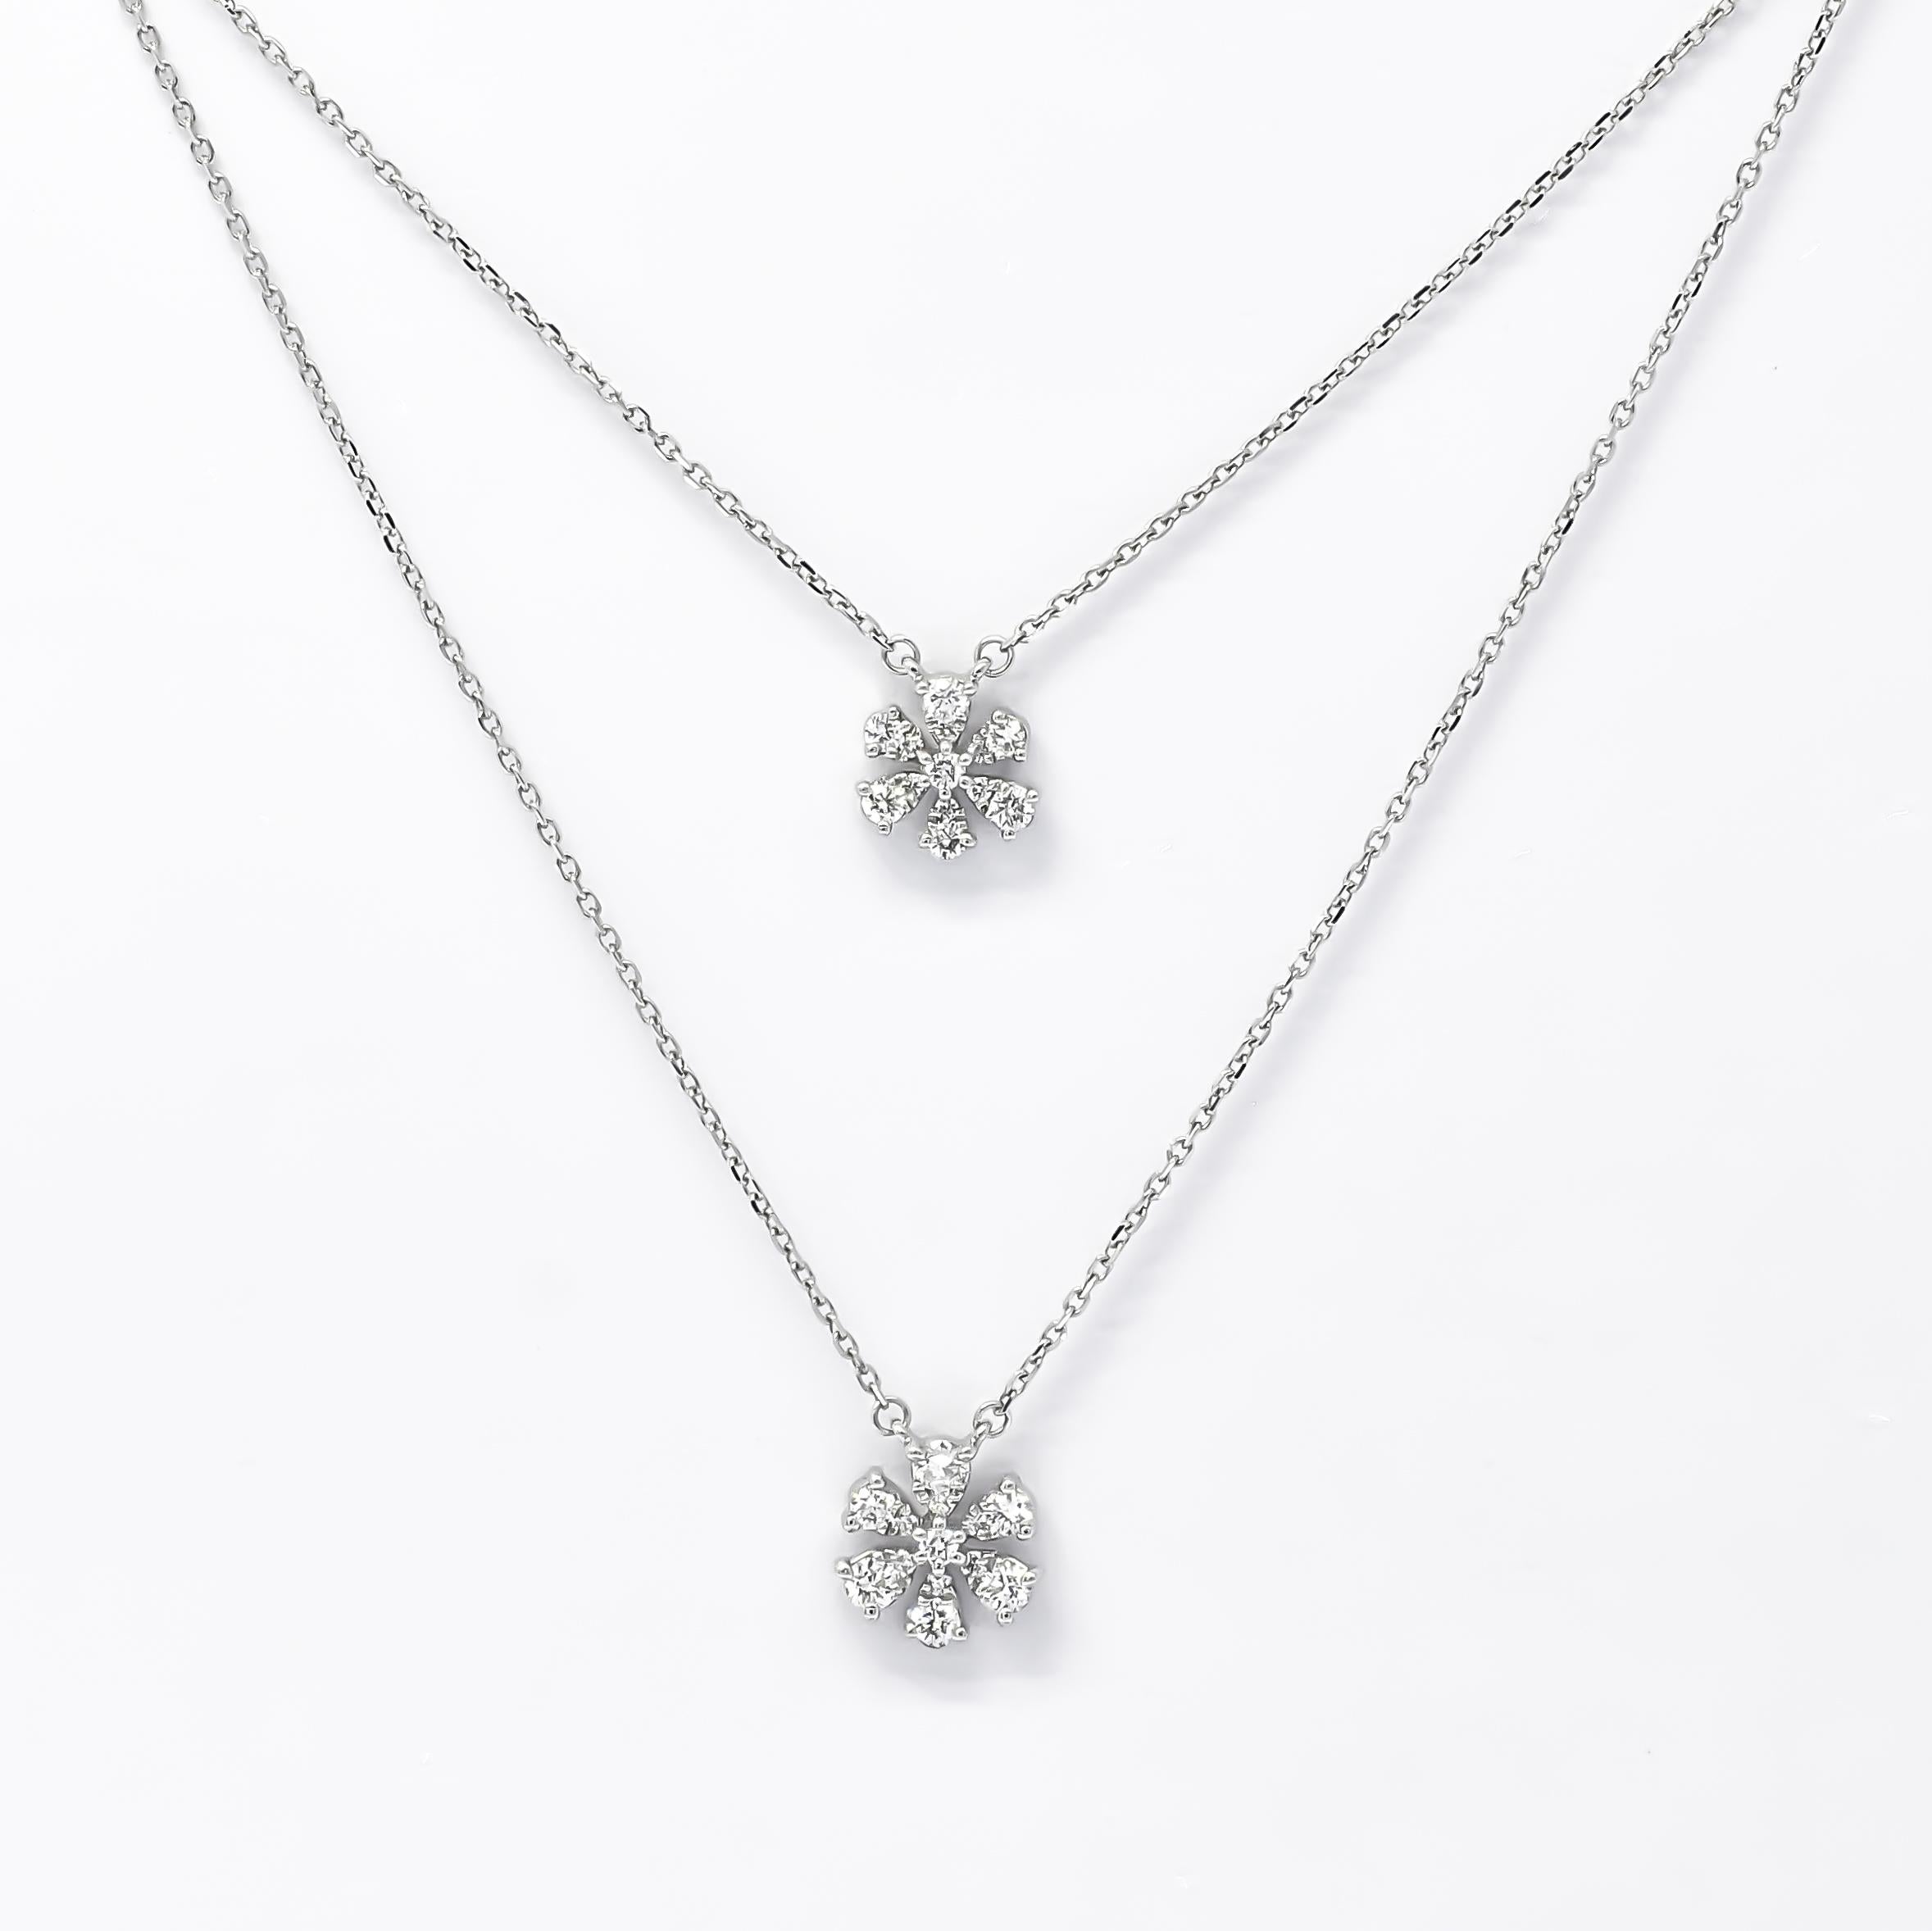 The necklace features a double-layer chain design that adds depth and dimension to its overall aesthetic. Each layer gracefully cascades along the neckline, creating a captivating visual effect that draws attention. The delicate chains are